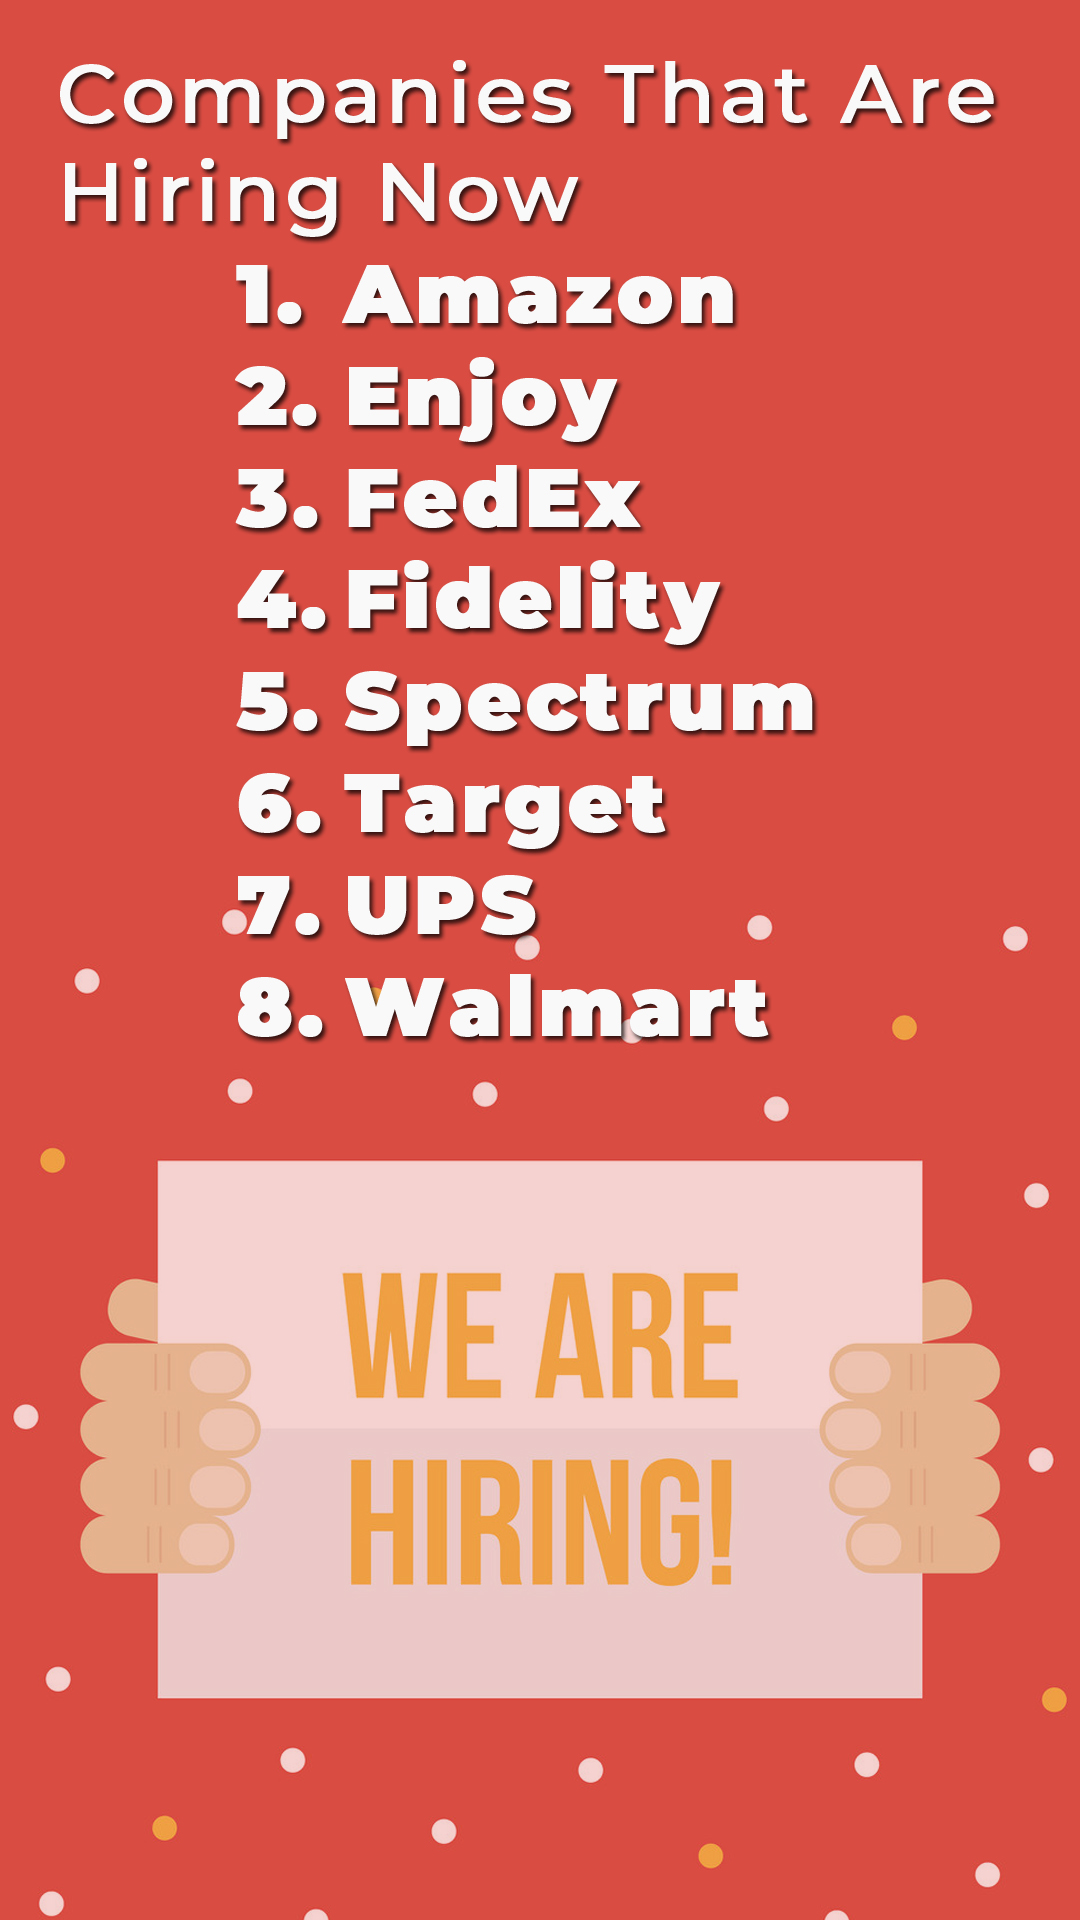 Companies That Are Hiring Now